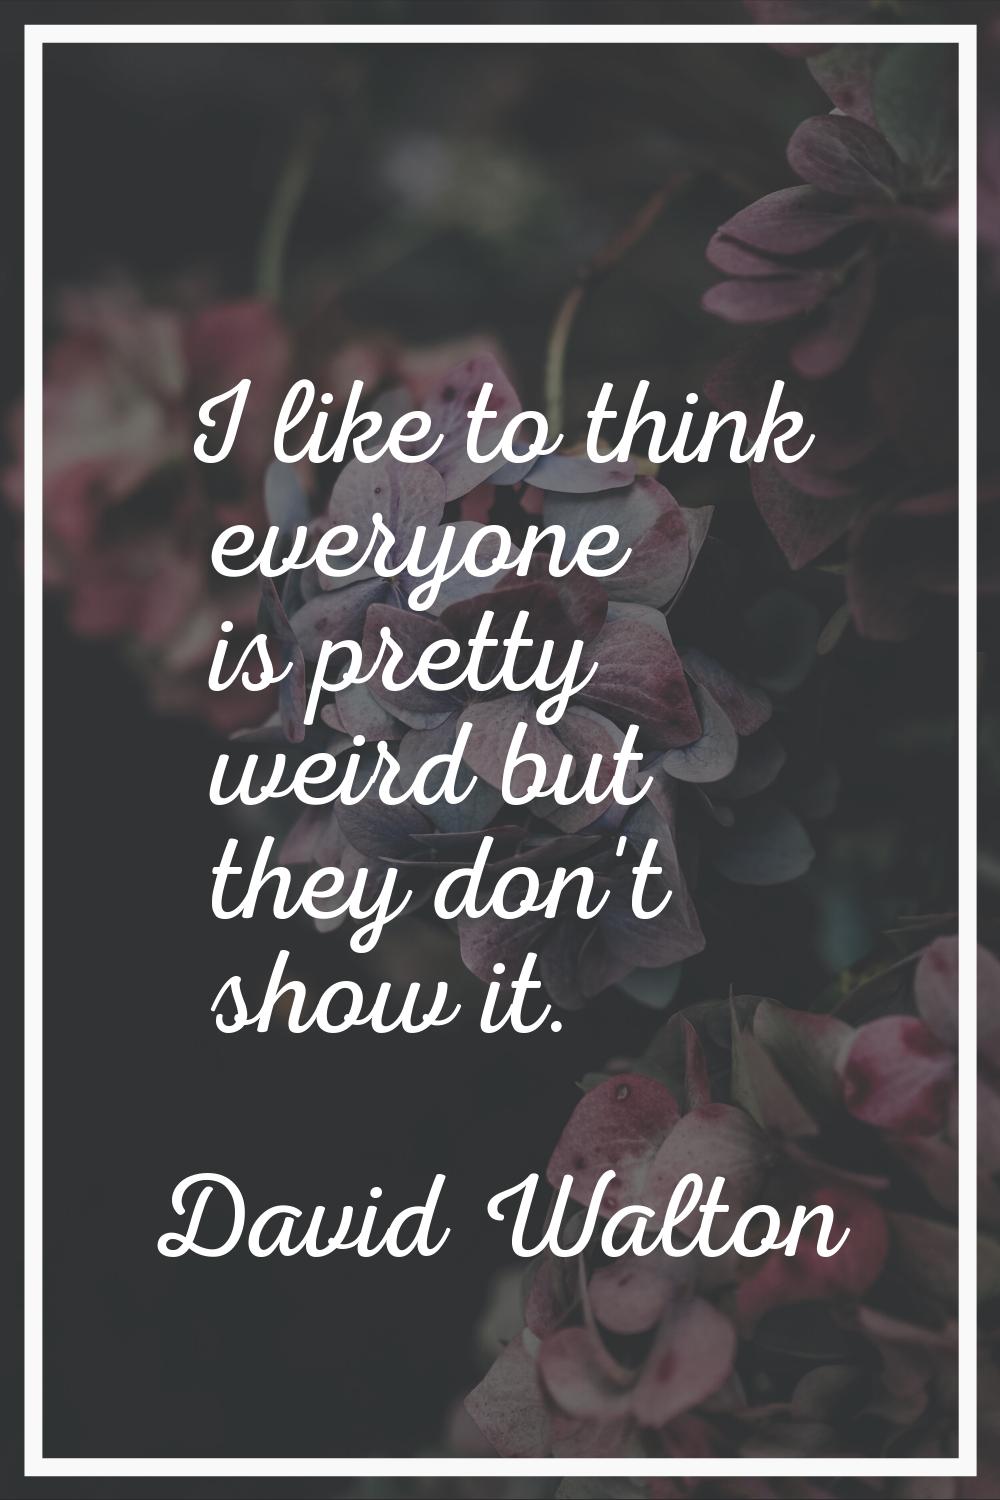 I like to think everyone is pretty weird but they don't show it.